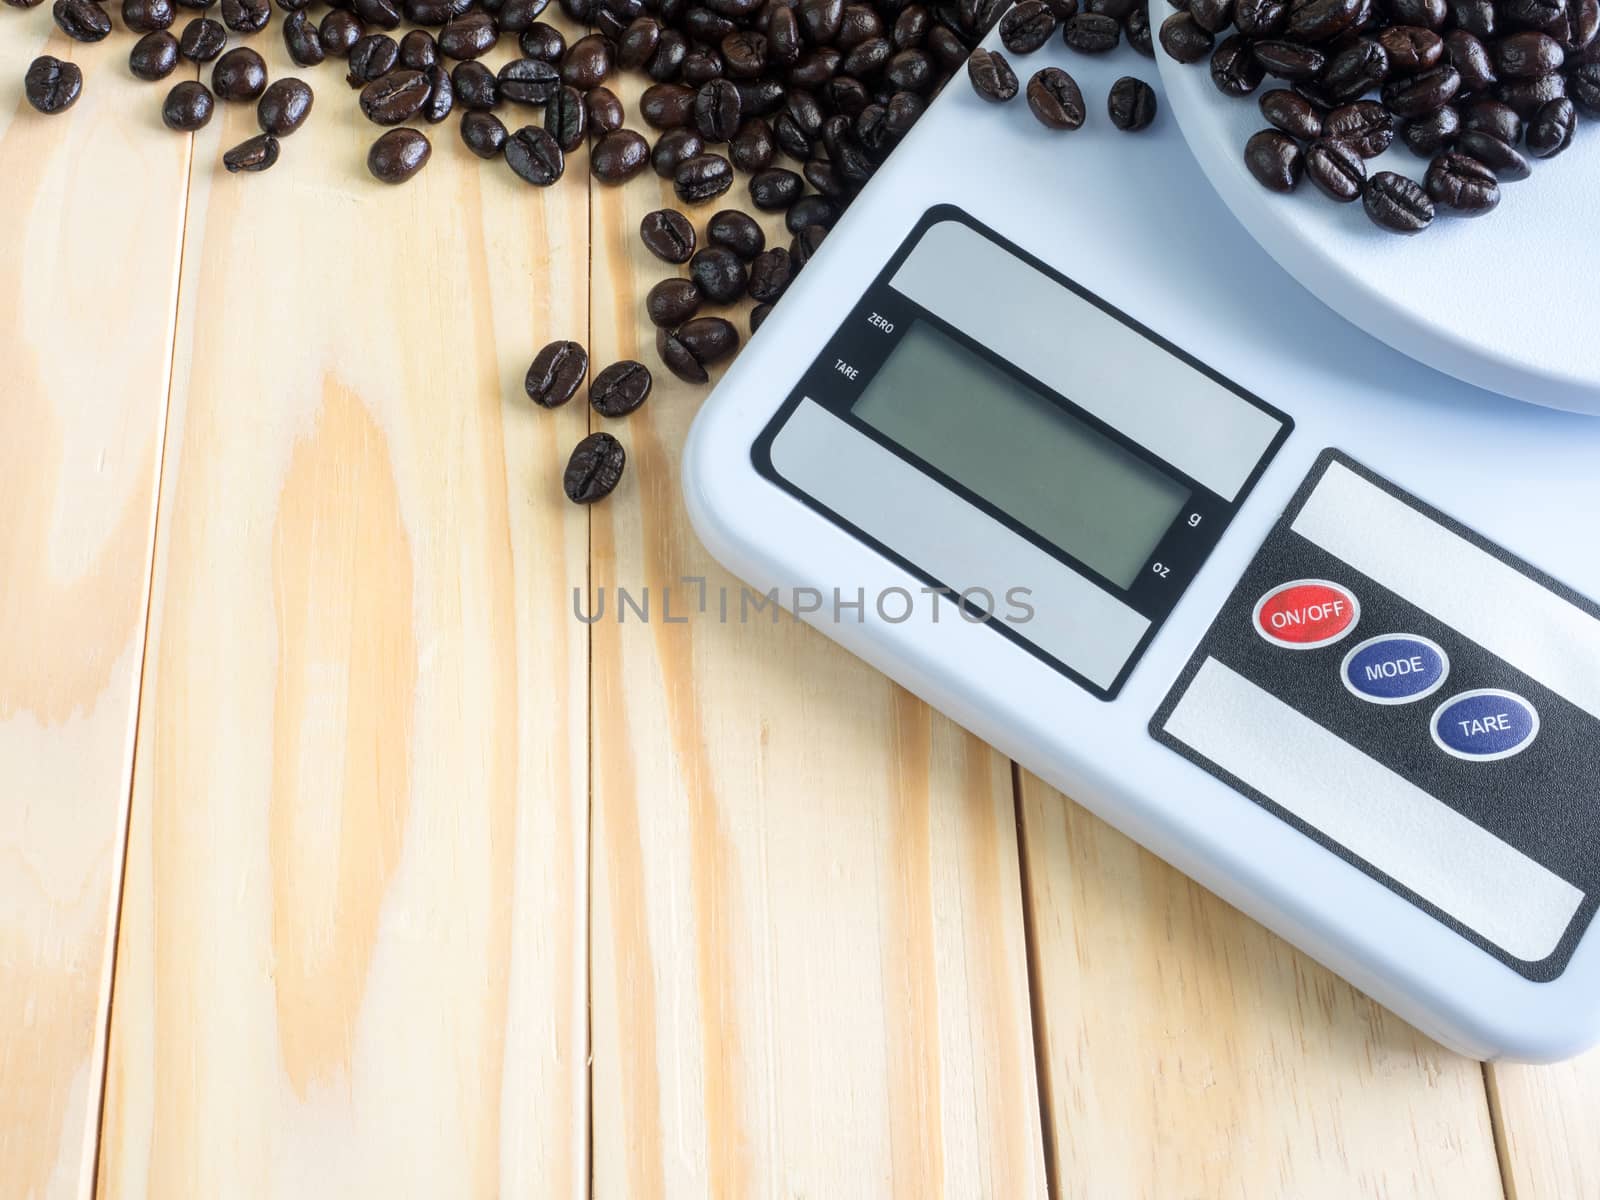  digital measuring device and coffee beans